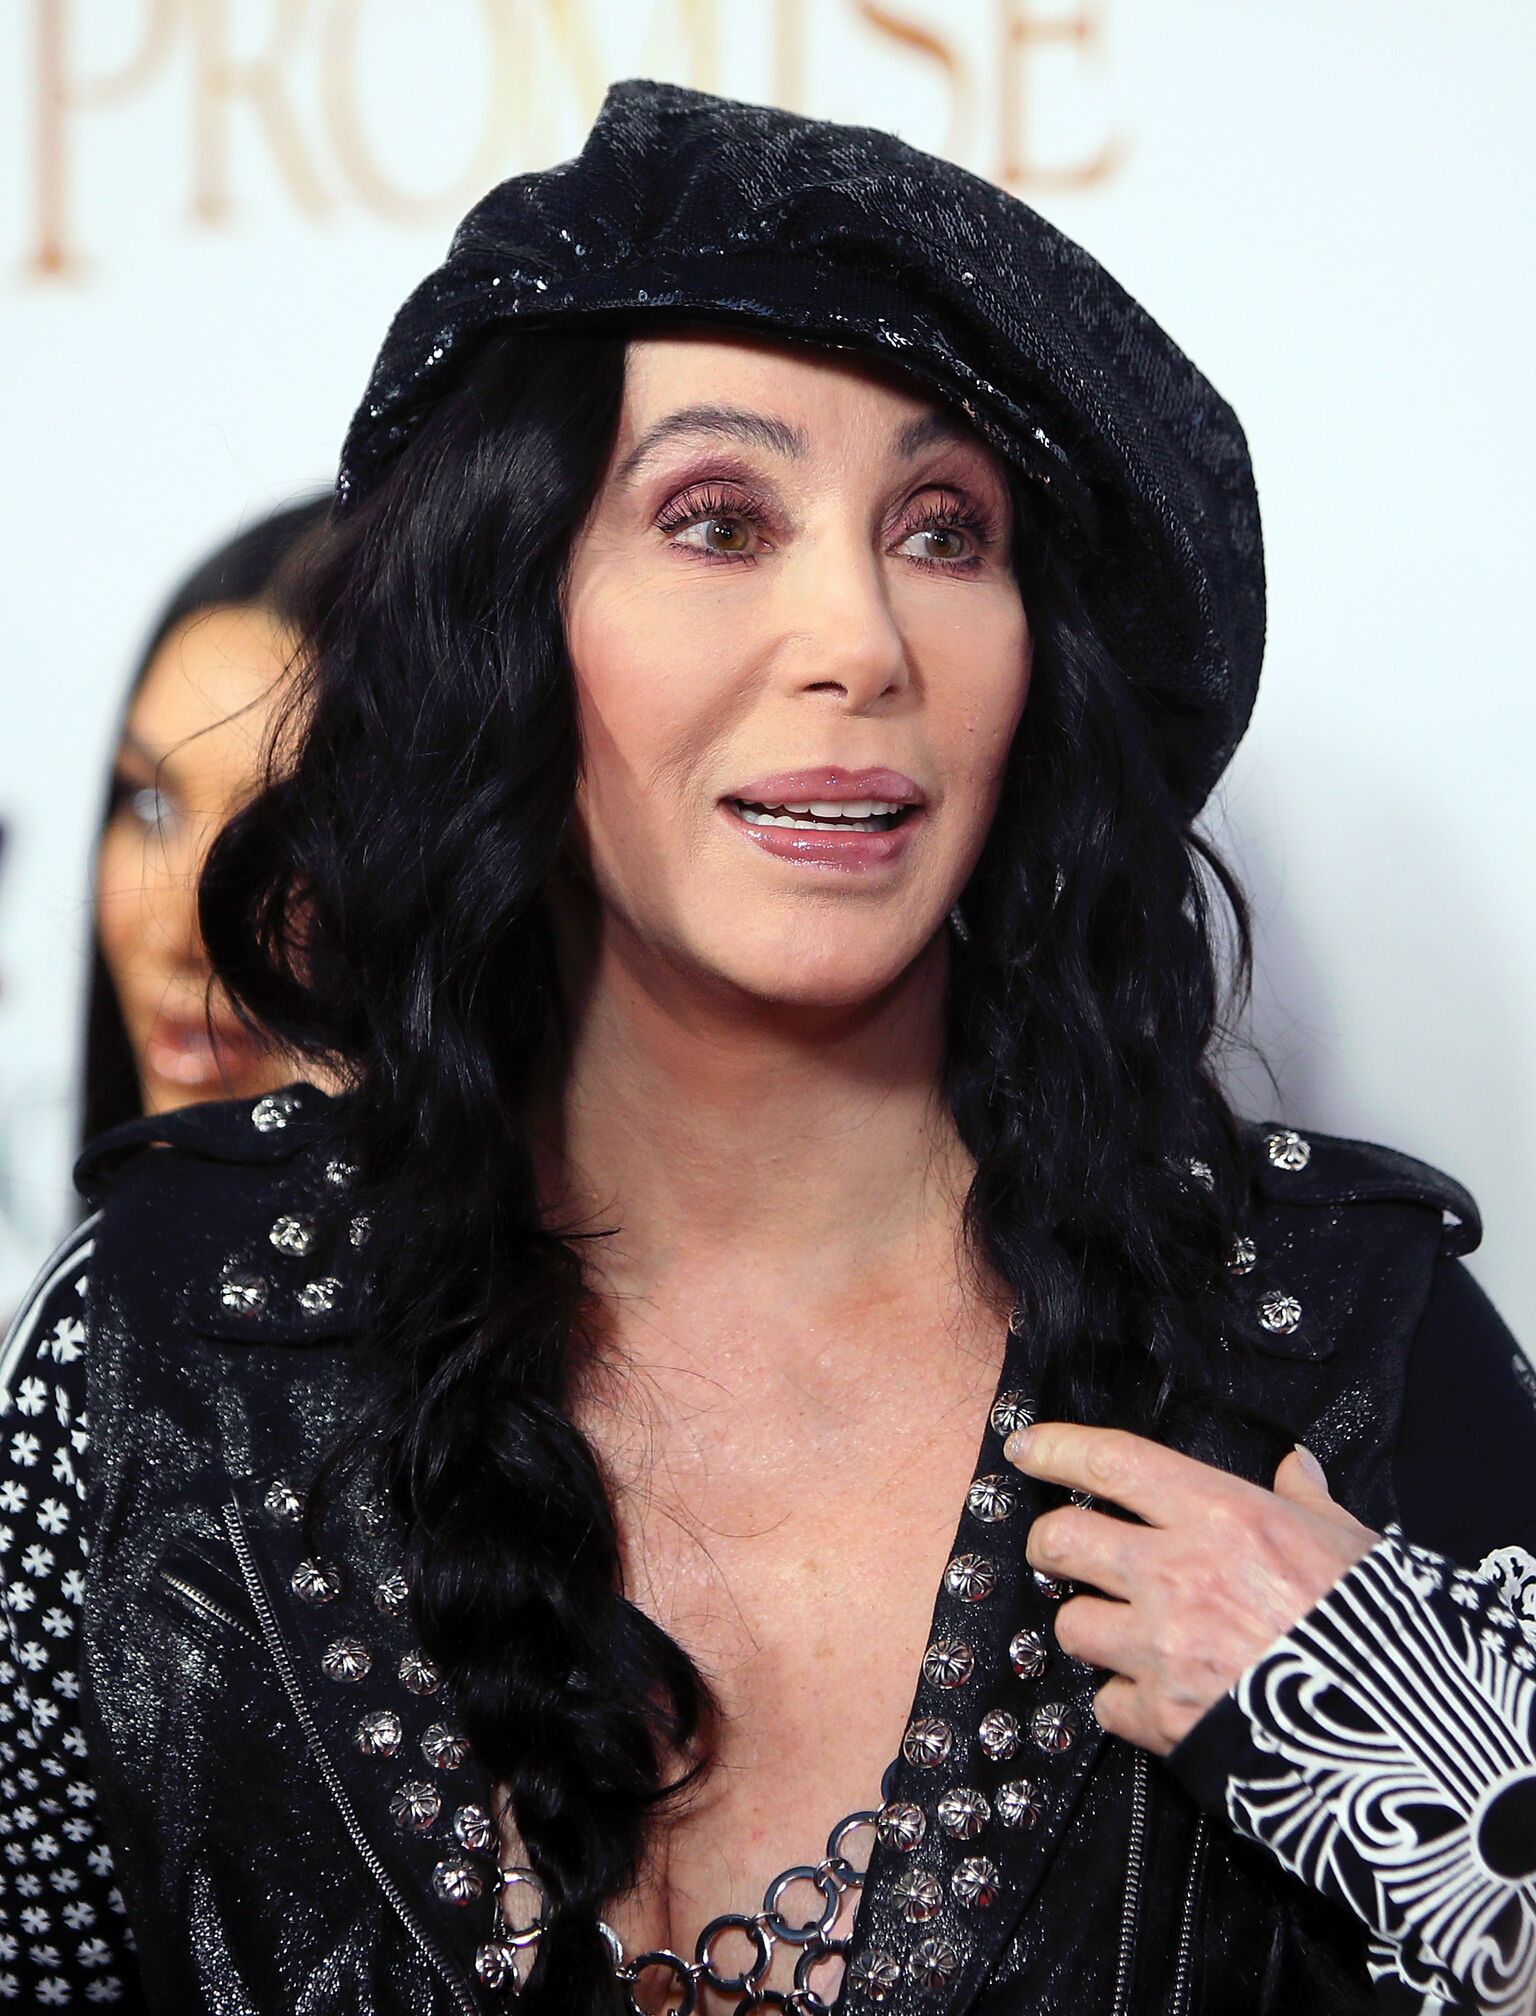  Cher attends the premiere of Open Road Films' "The Promise" at TCL Chinese Theatre  | Getty Images